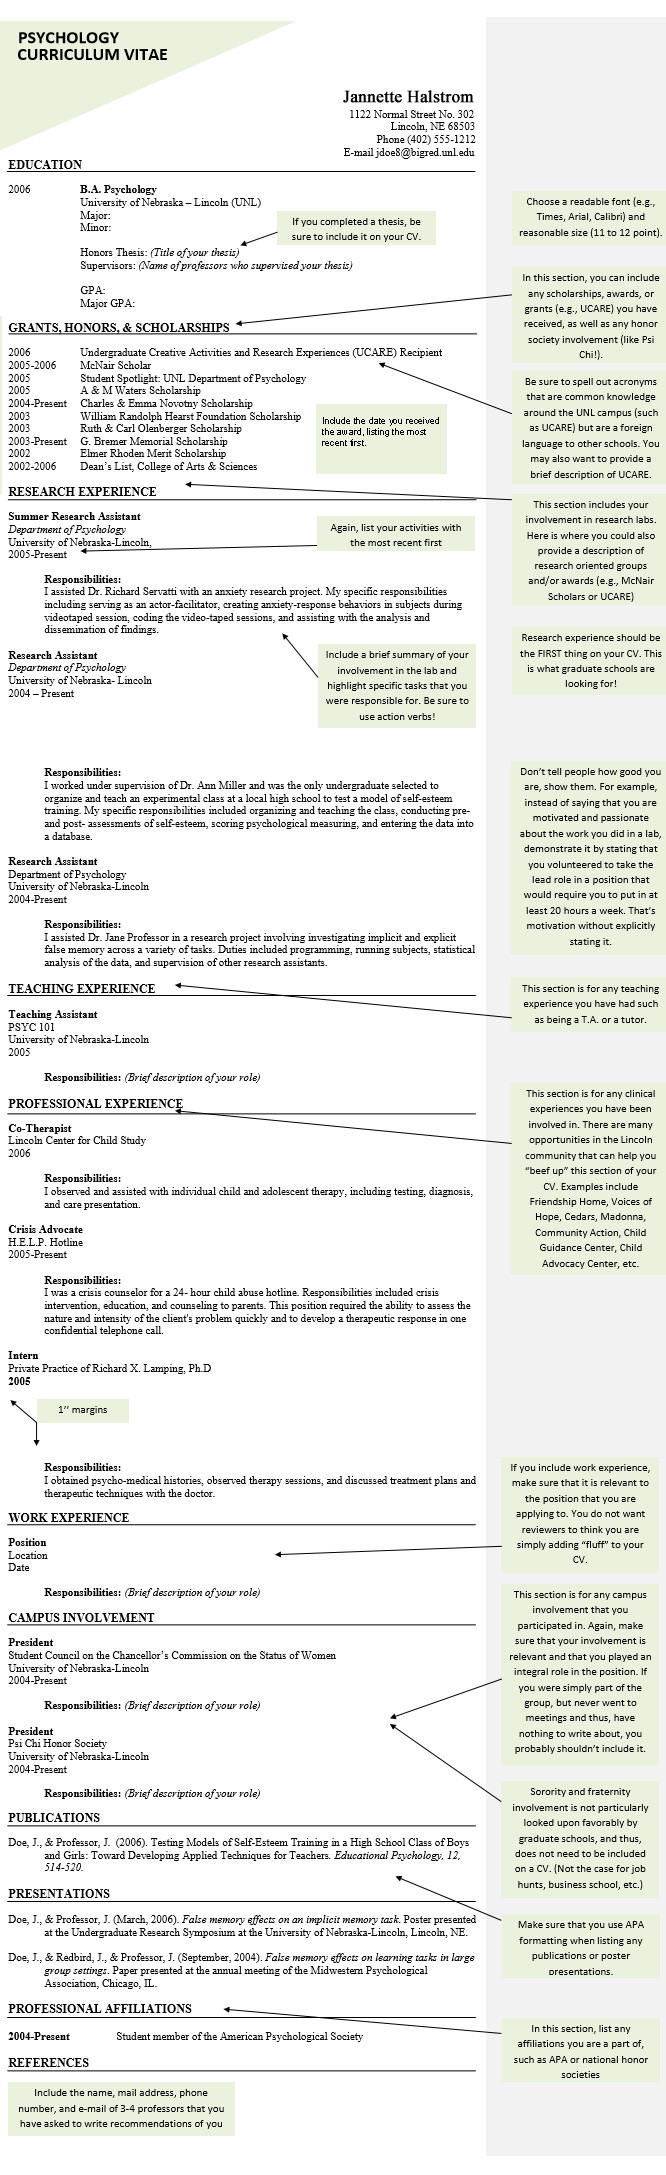 Sample Resume Graduate School Application Psychology Psychology Cv and Resume Samples, Templates and Tips